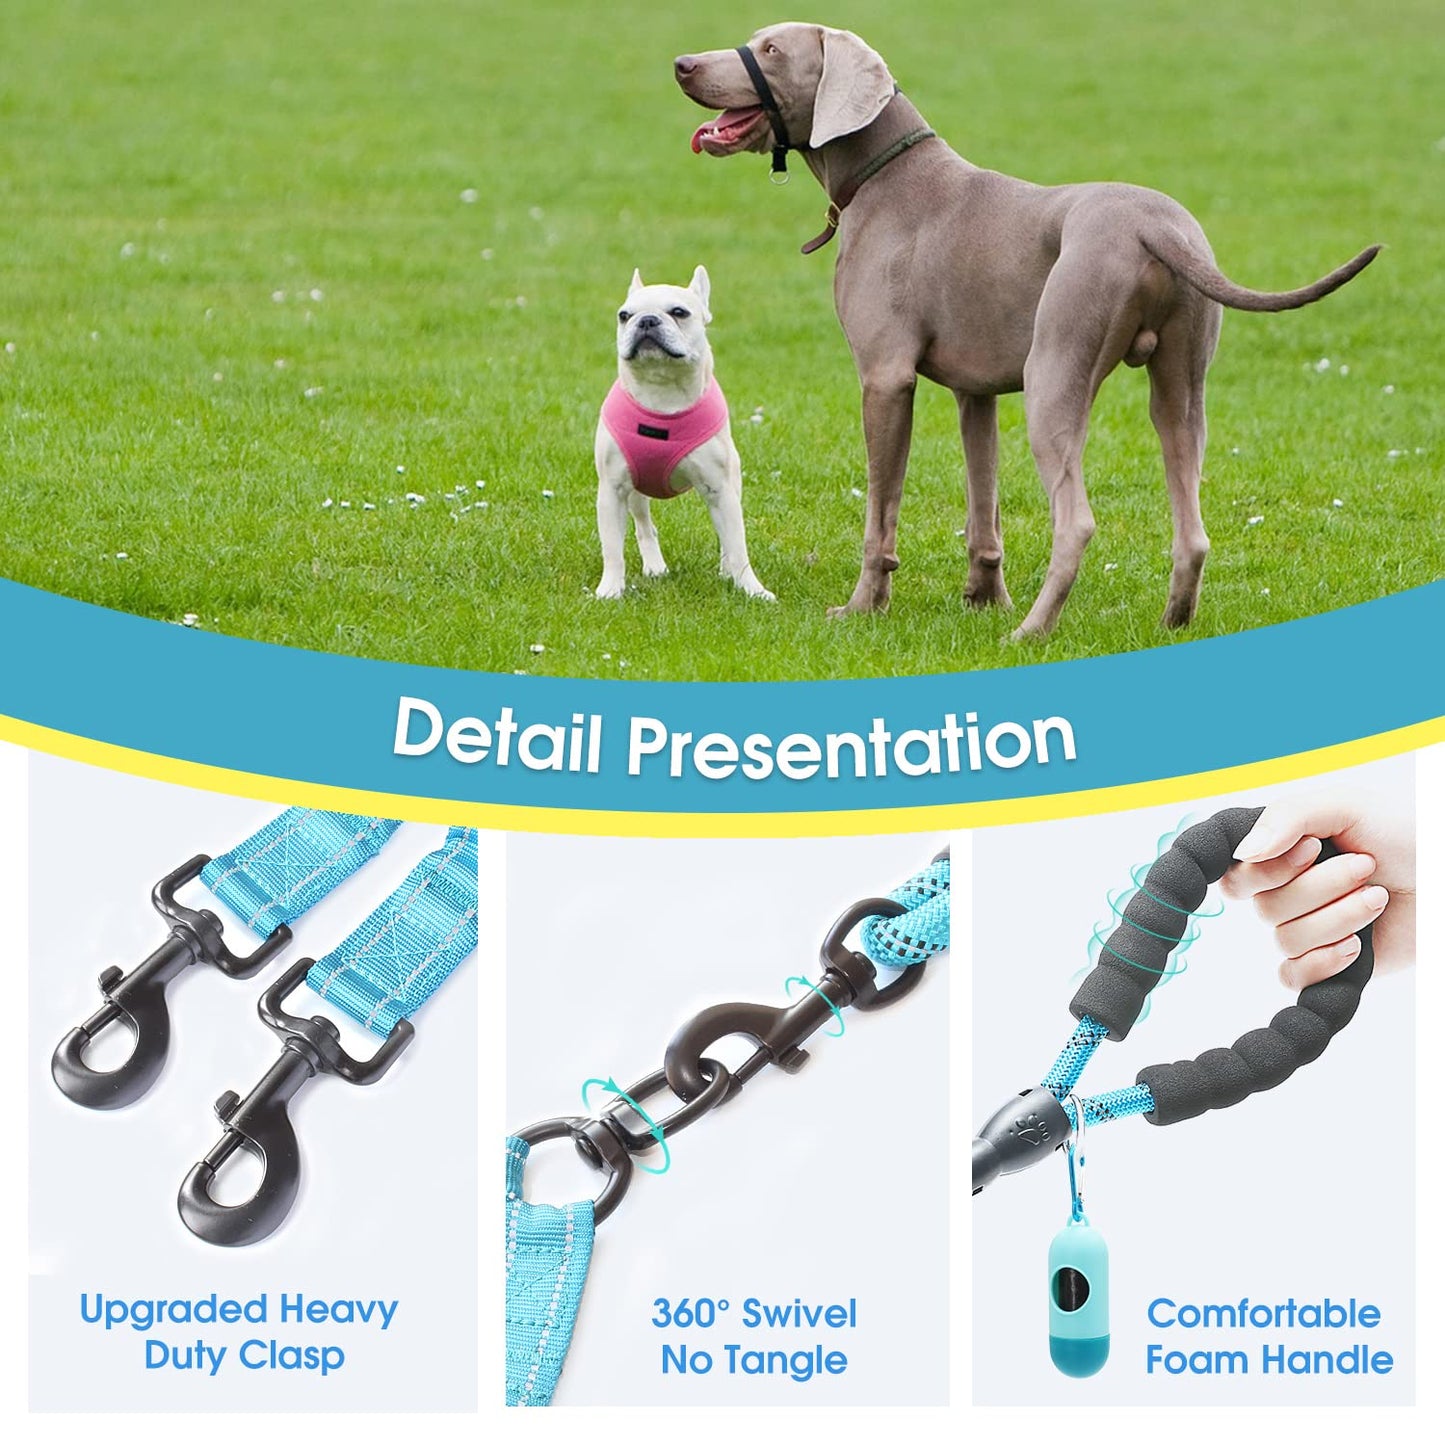 Double Dog Leash, 4 FT Rope Dog Leash with Tangle Free Shock Absorbing Bungee and Poop Bags for Dual Small Medium Large Dogs (Medium/Large, Blue)